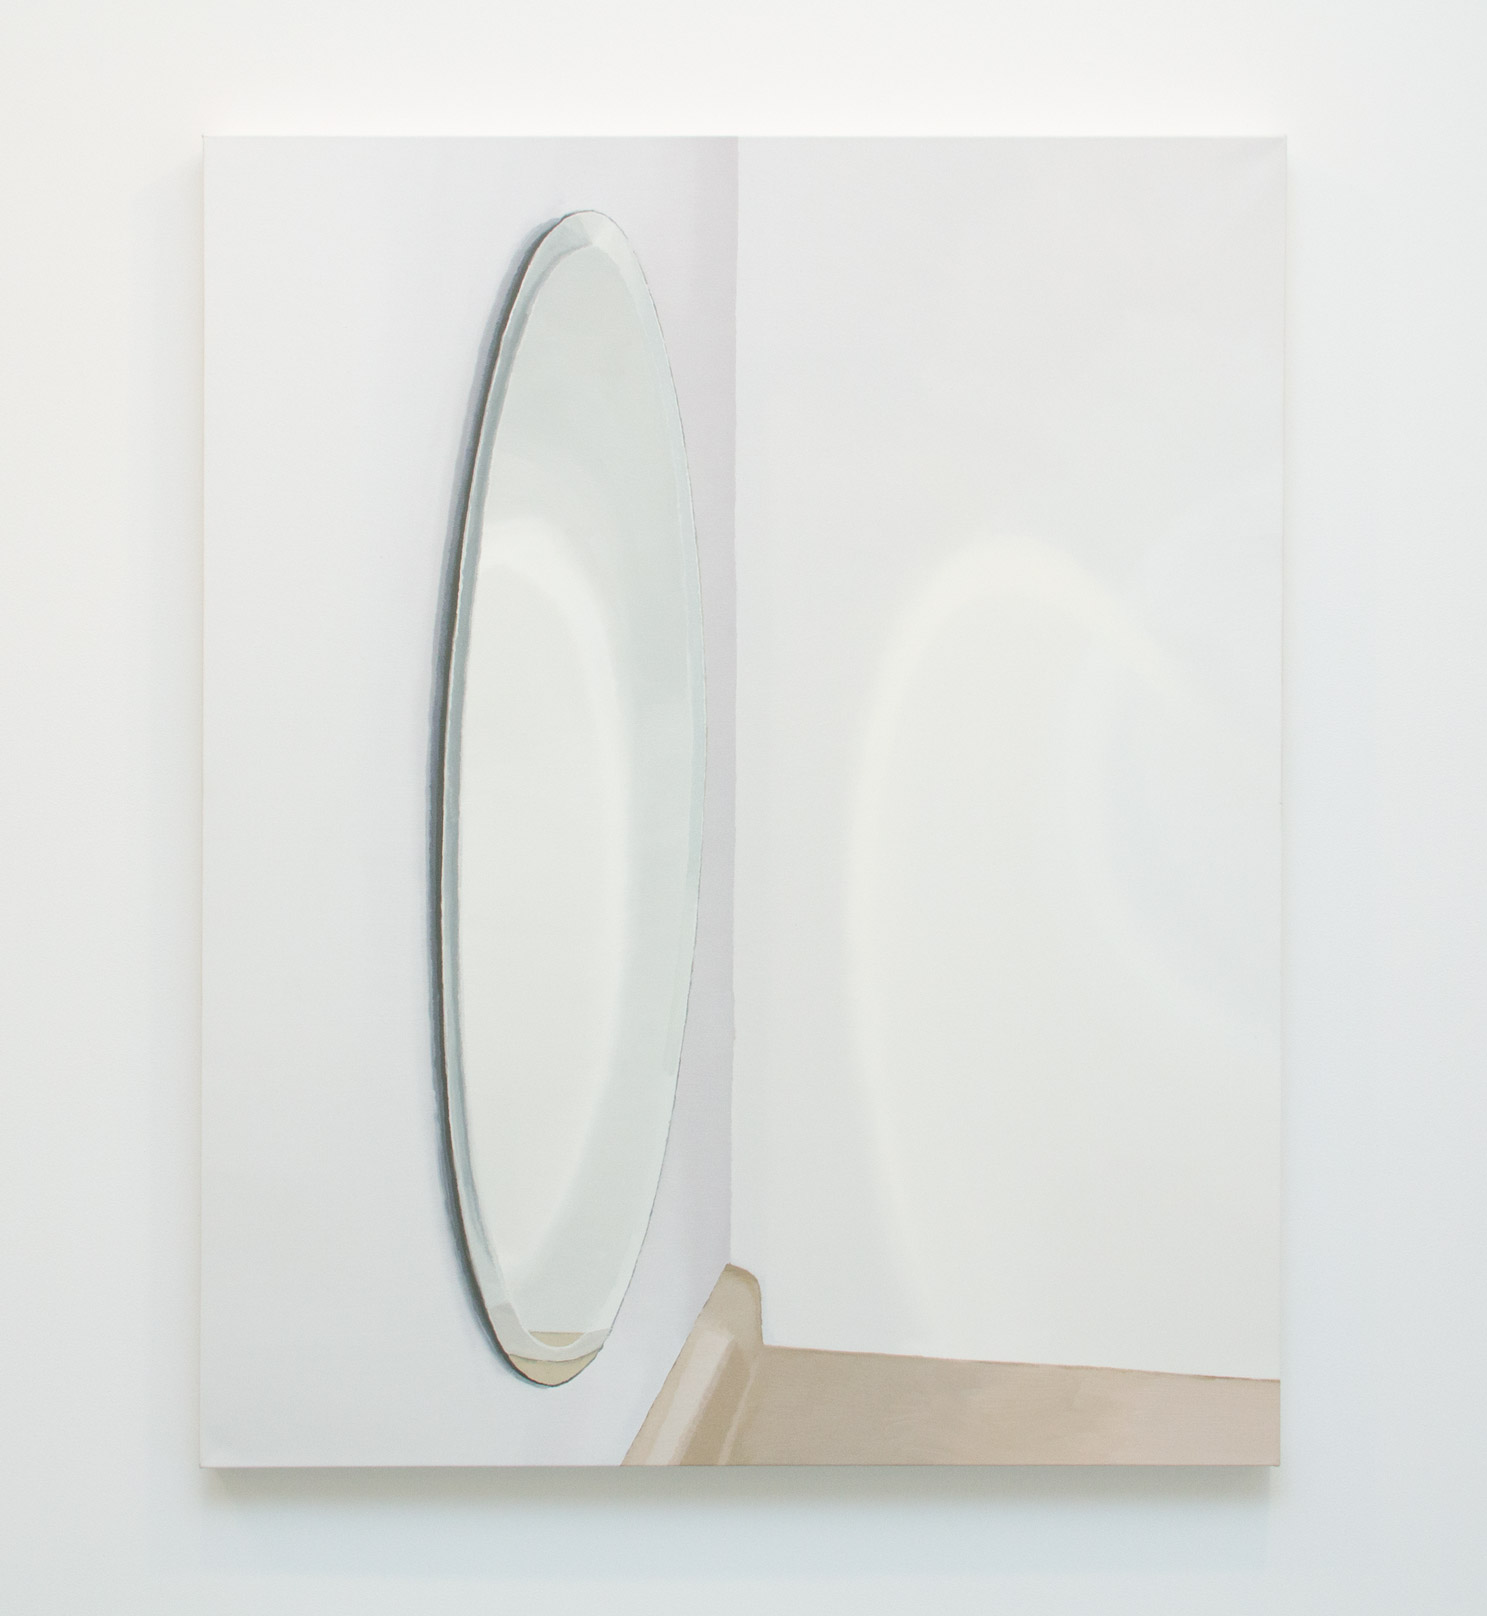 Roger White, Oval Mirror with Counter, 2015, oil on canvas, 43h x 35w in.